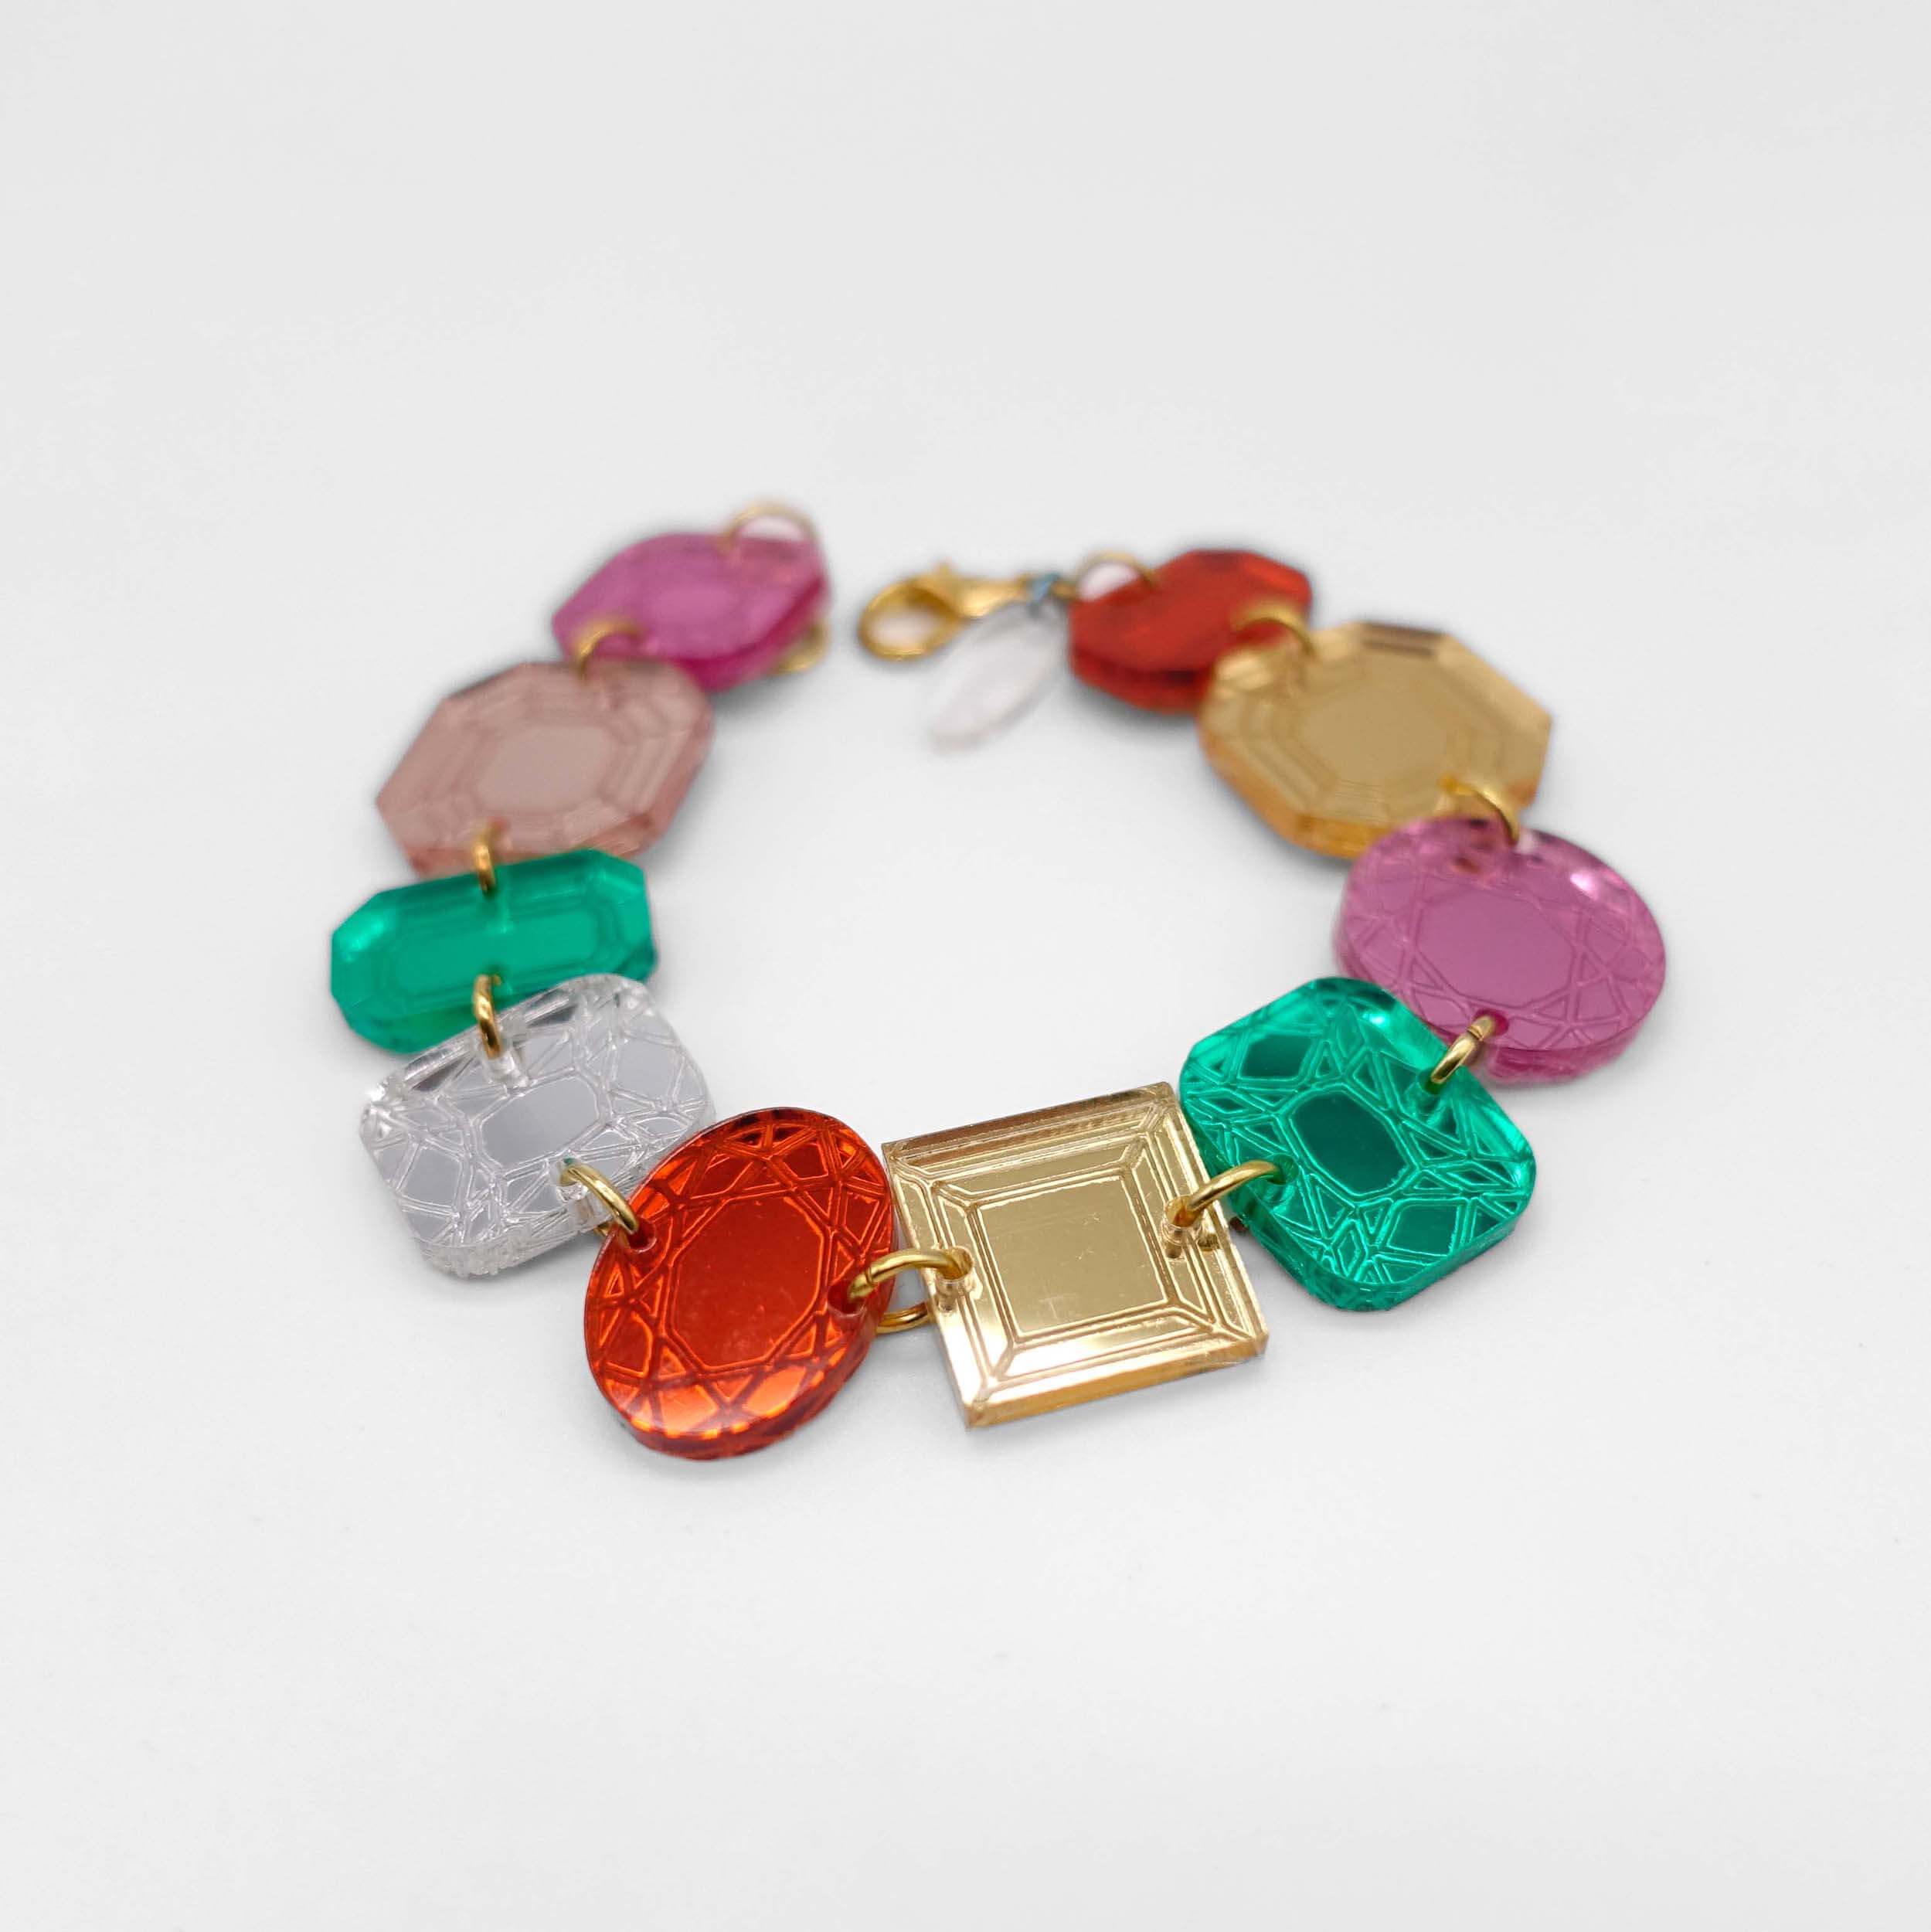 Funky Jewel mismatched gem bracelet, designed by Sarah Day as part of the Austerity Jewels collection, shown on a white background. Designed by Sarah Day for Wear and Resist as part of the Austerity Jewels for Brexit Britain collection.  